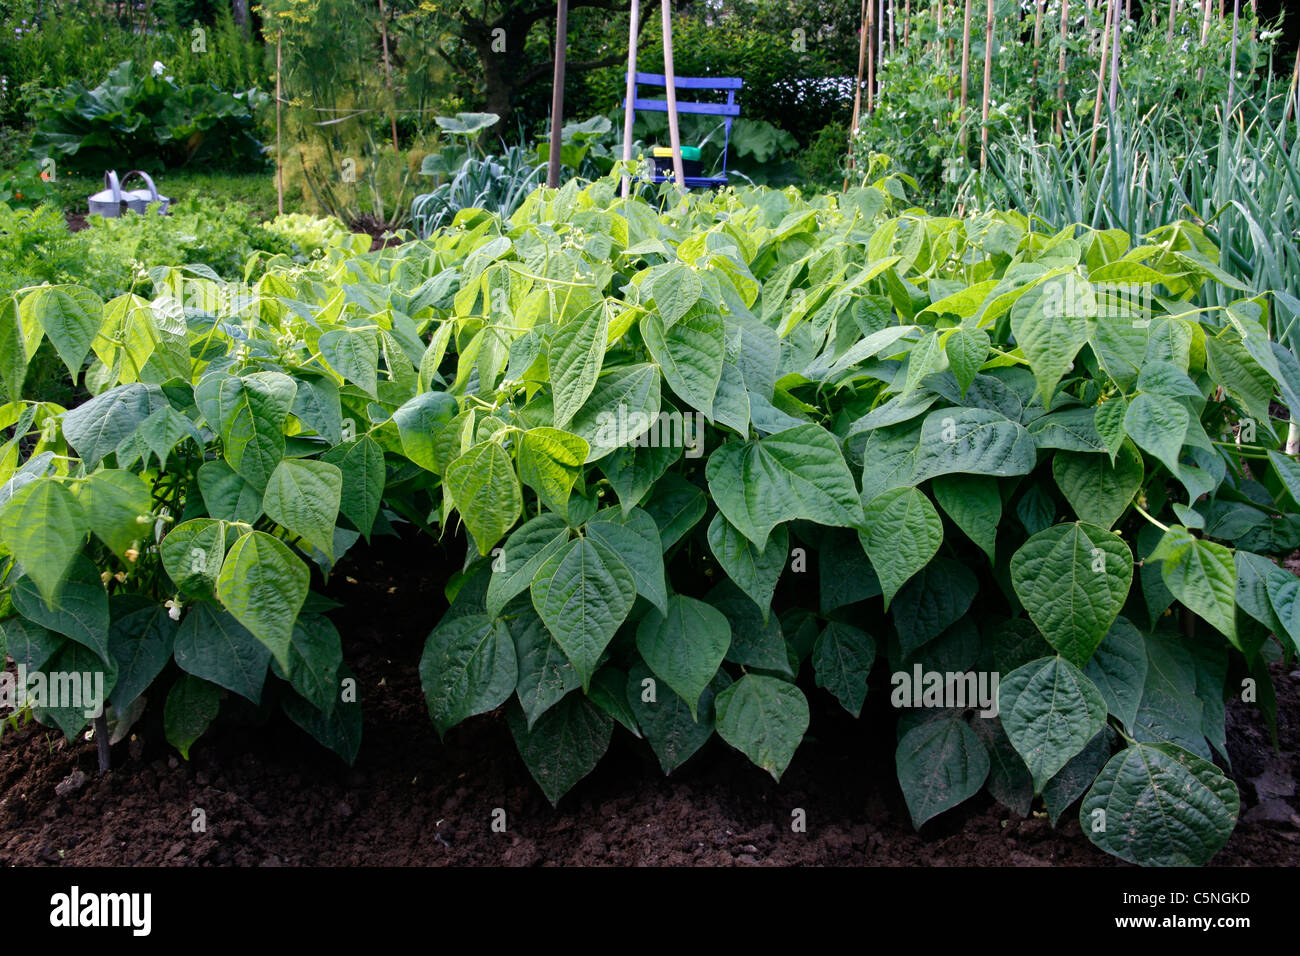 Mixed bed of dwarf green beans (phaseolus vulgaris) in the vegetable garden. Stock Photo